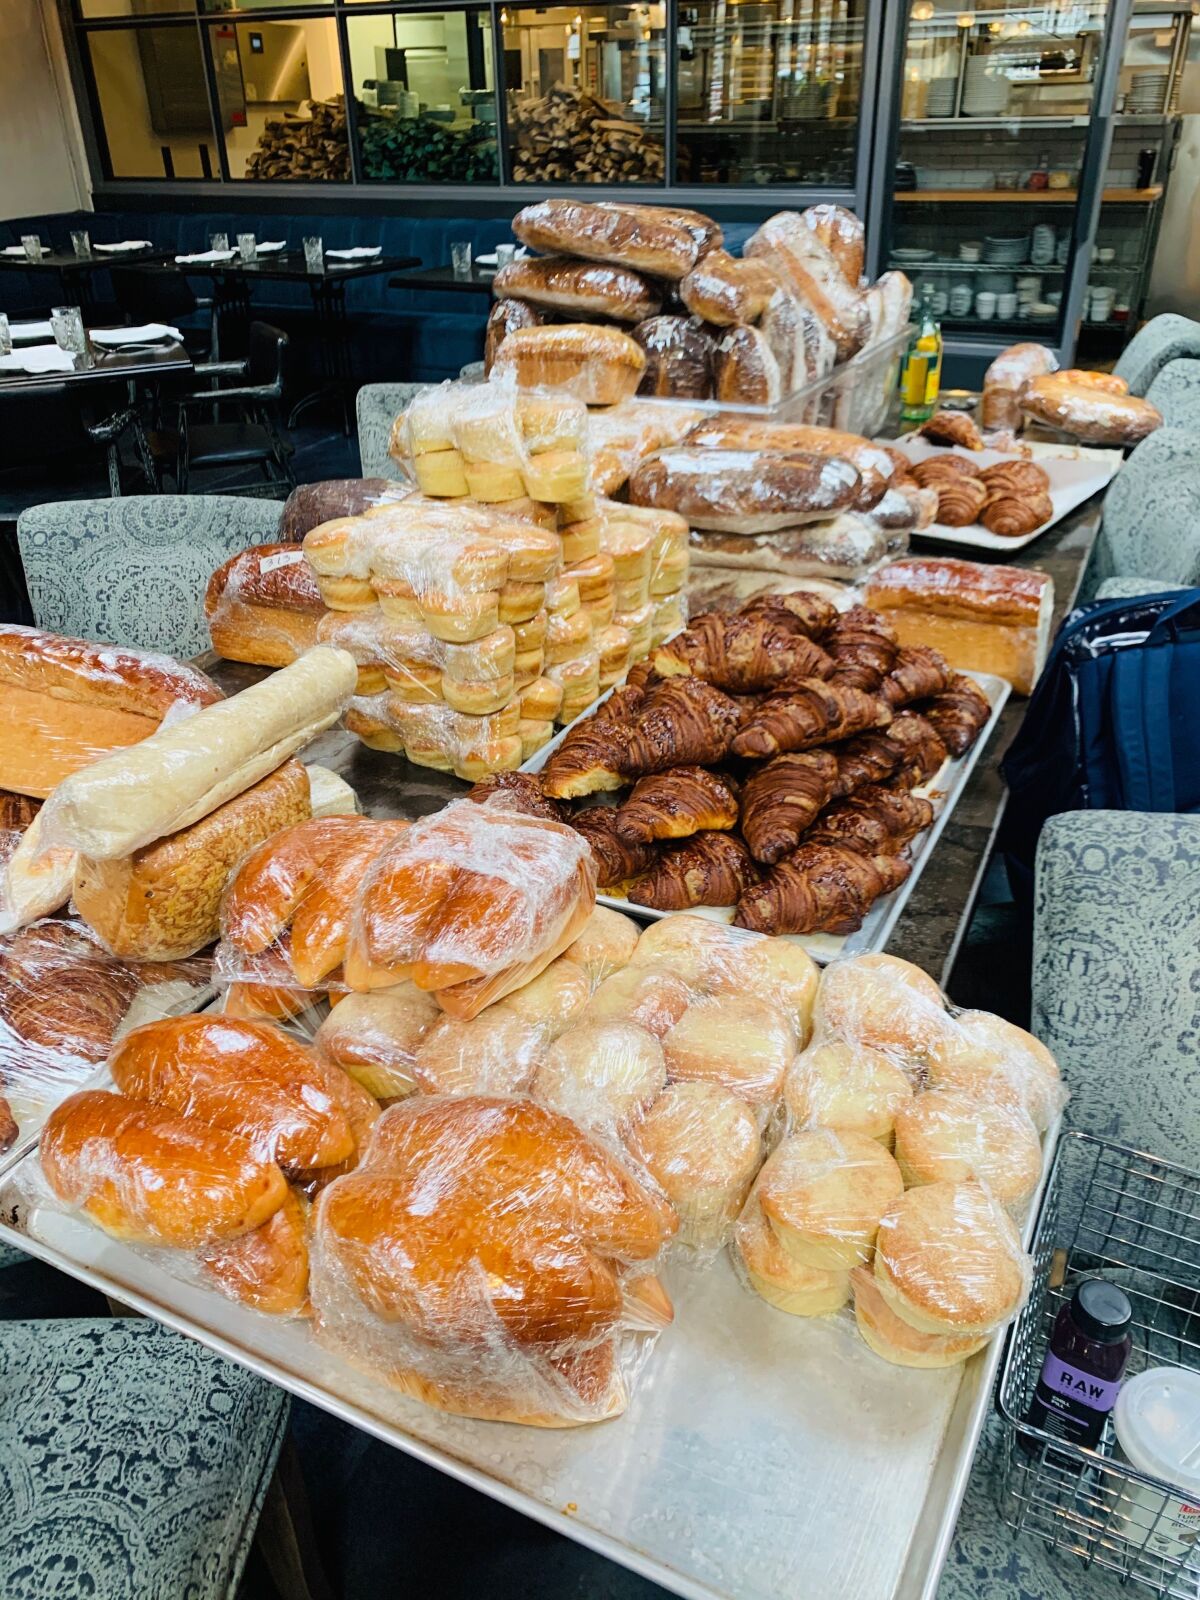 Stacks of fresh-baked pastries and breads that were distributed to employees on Sunday after Herb & Wood restaurant shut down in Little Italy due to the COVID-19 pandemic.